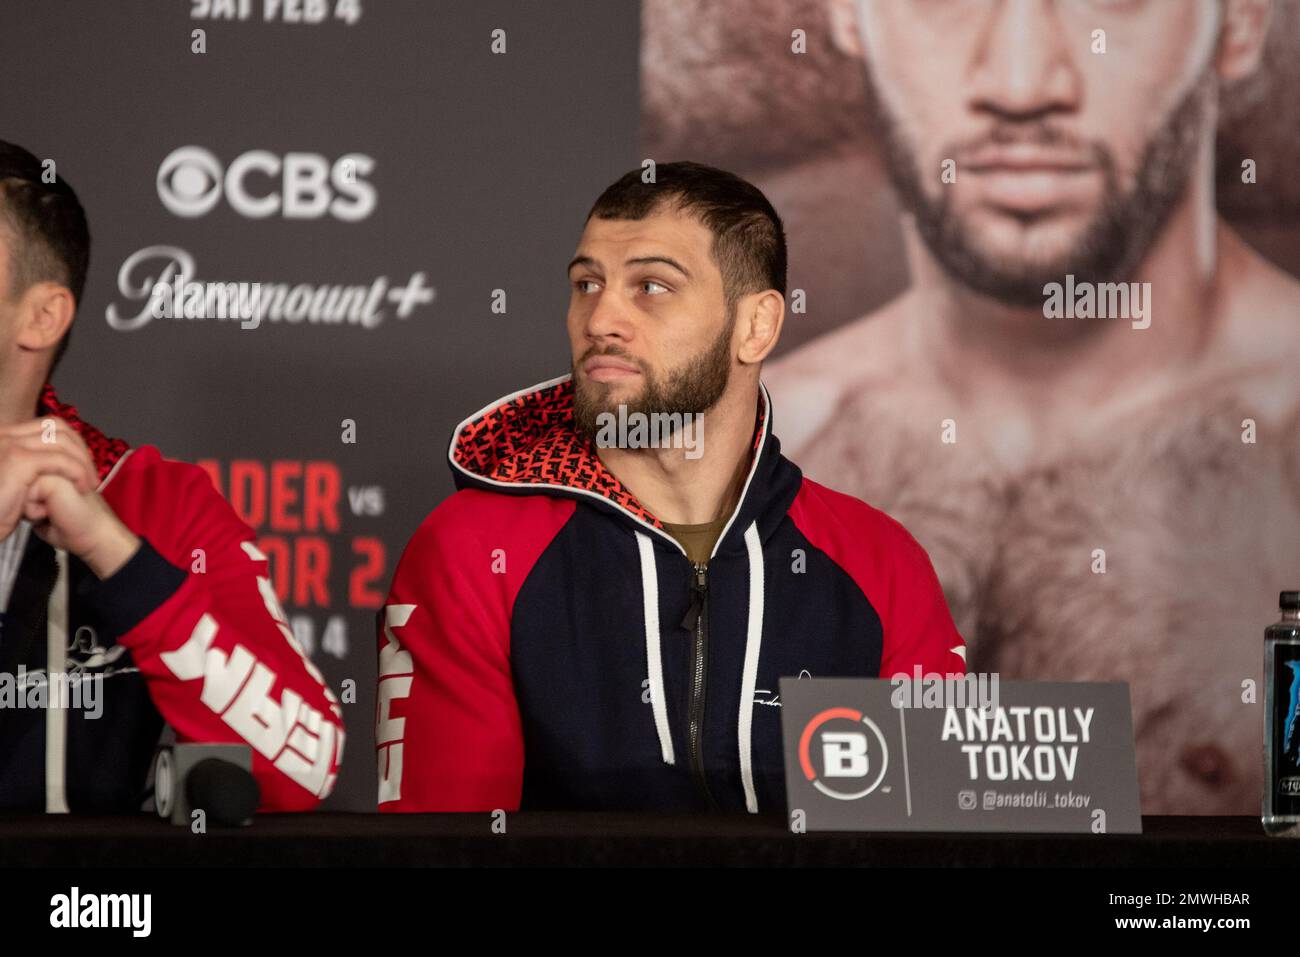 London, UK. 24th May 2018. Anatoly Tokov takes to the scales ahead of his  friday night fight. Credit: Dan Cooke Credit: Dan Cooke/Alamy Live News  Stock Photo - Alamy